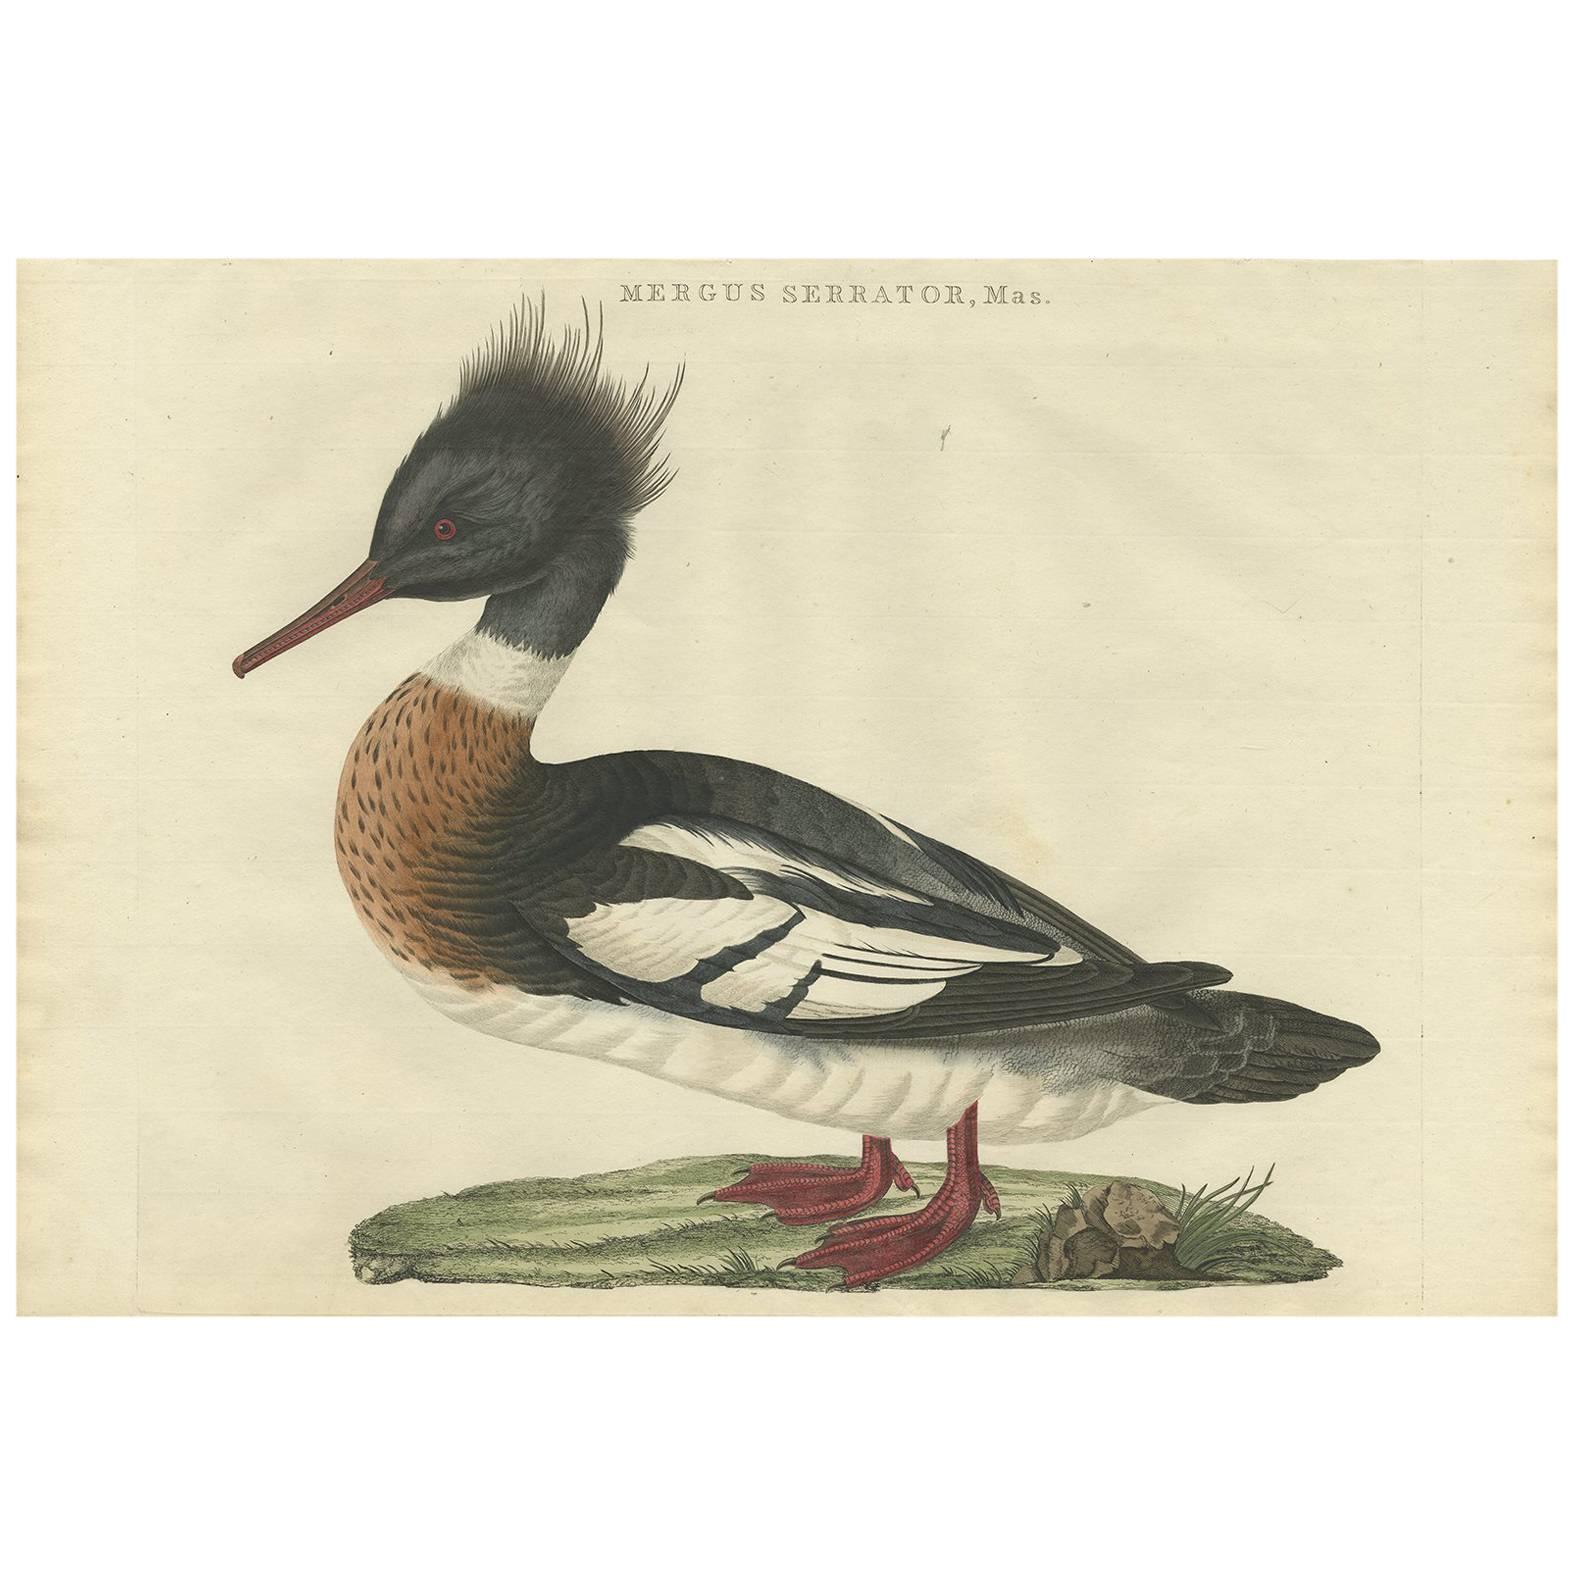 Antique Bird Print of a Male Red-Breasted Merganser by Sepp & Nozeman, 1797